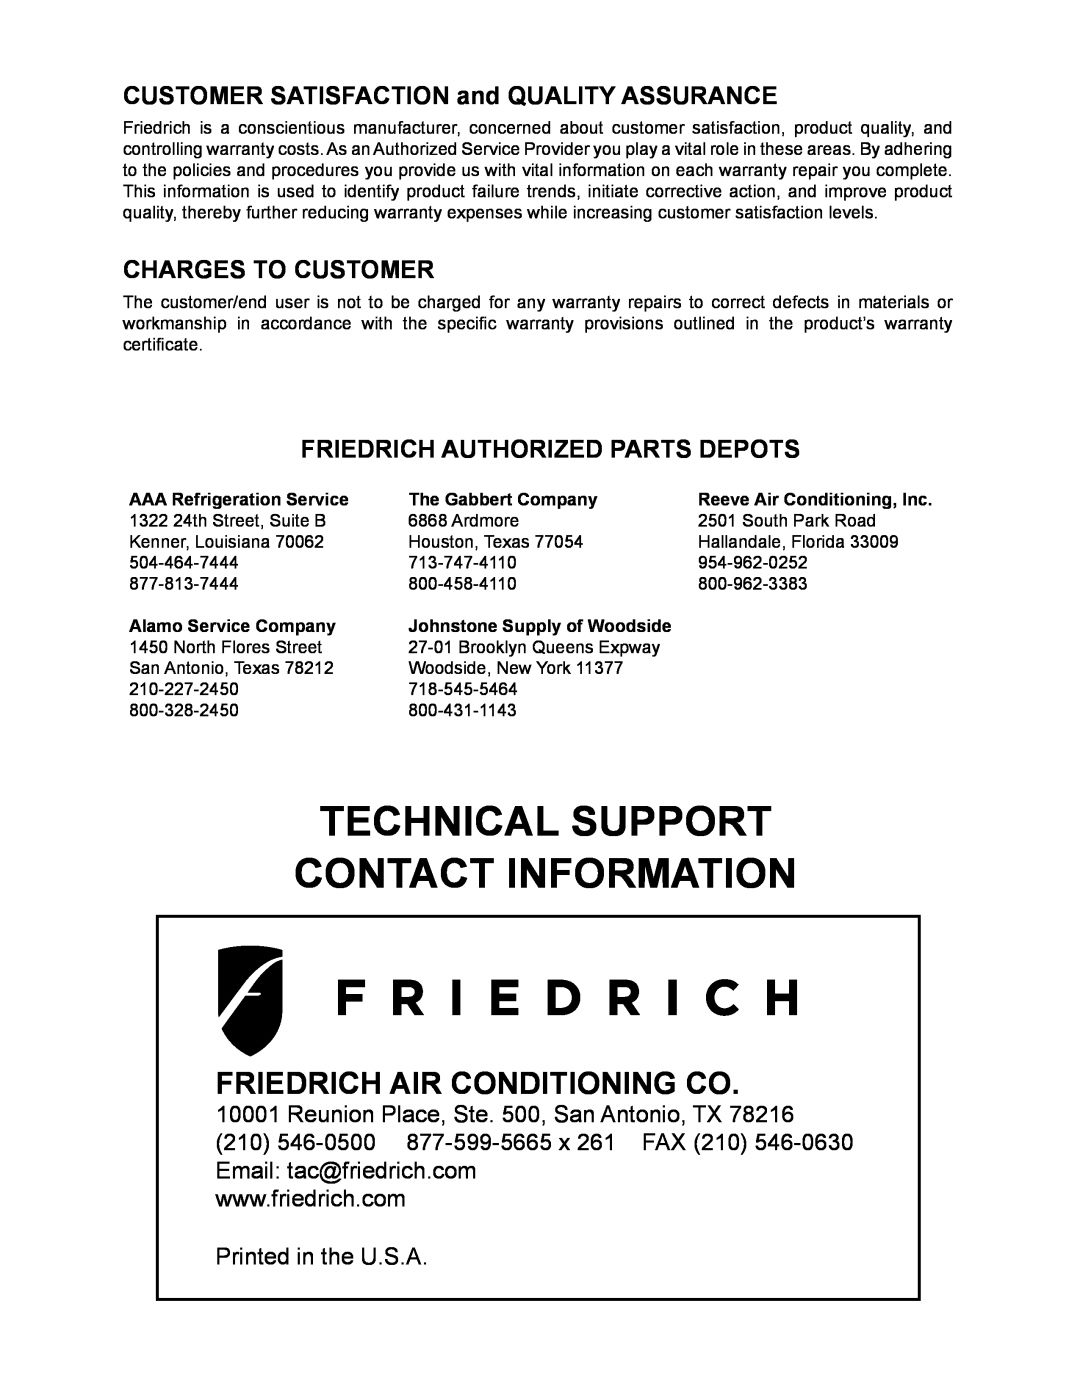 Friedrich PTAC - R410A Friedrich Air Conditioning Co, CUSTOMER SATISFACTION and QUALITY ASSURANCE, Charges To Customer 